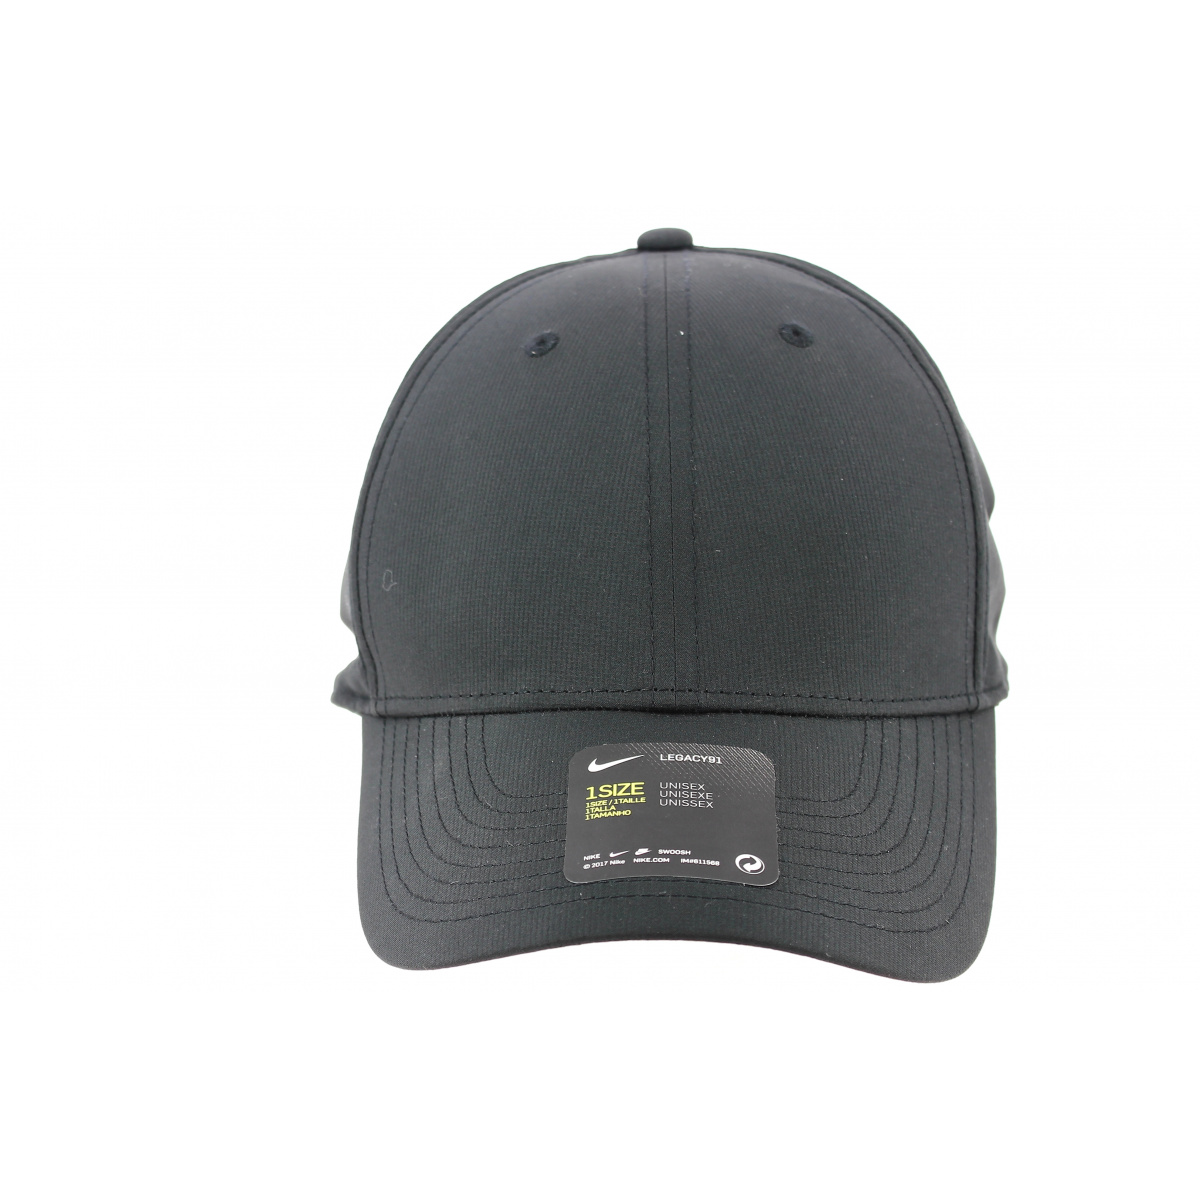 Diversidad Serena Nos vemos mañana Casquette Legacy 91 Noire Dri-Fit- Nike Reference : 8900 | Chapellerie  Traclet